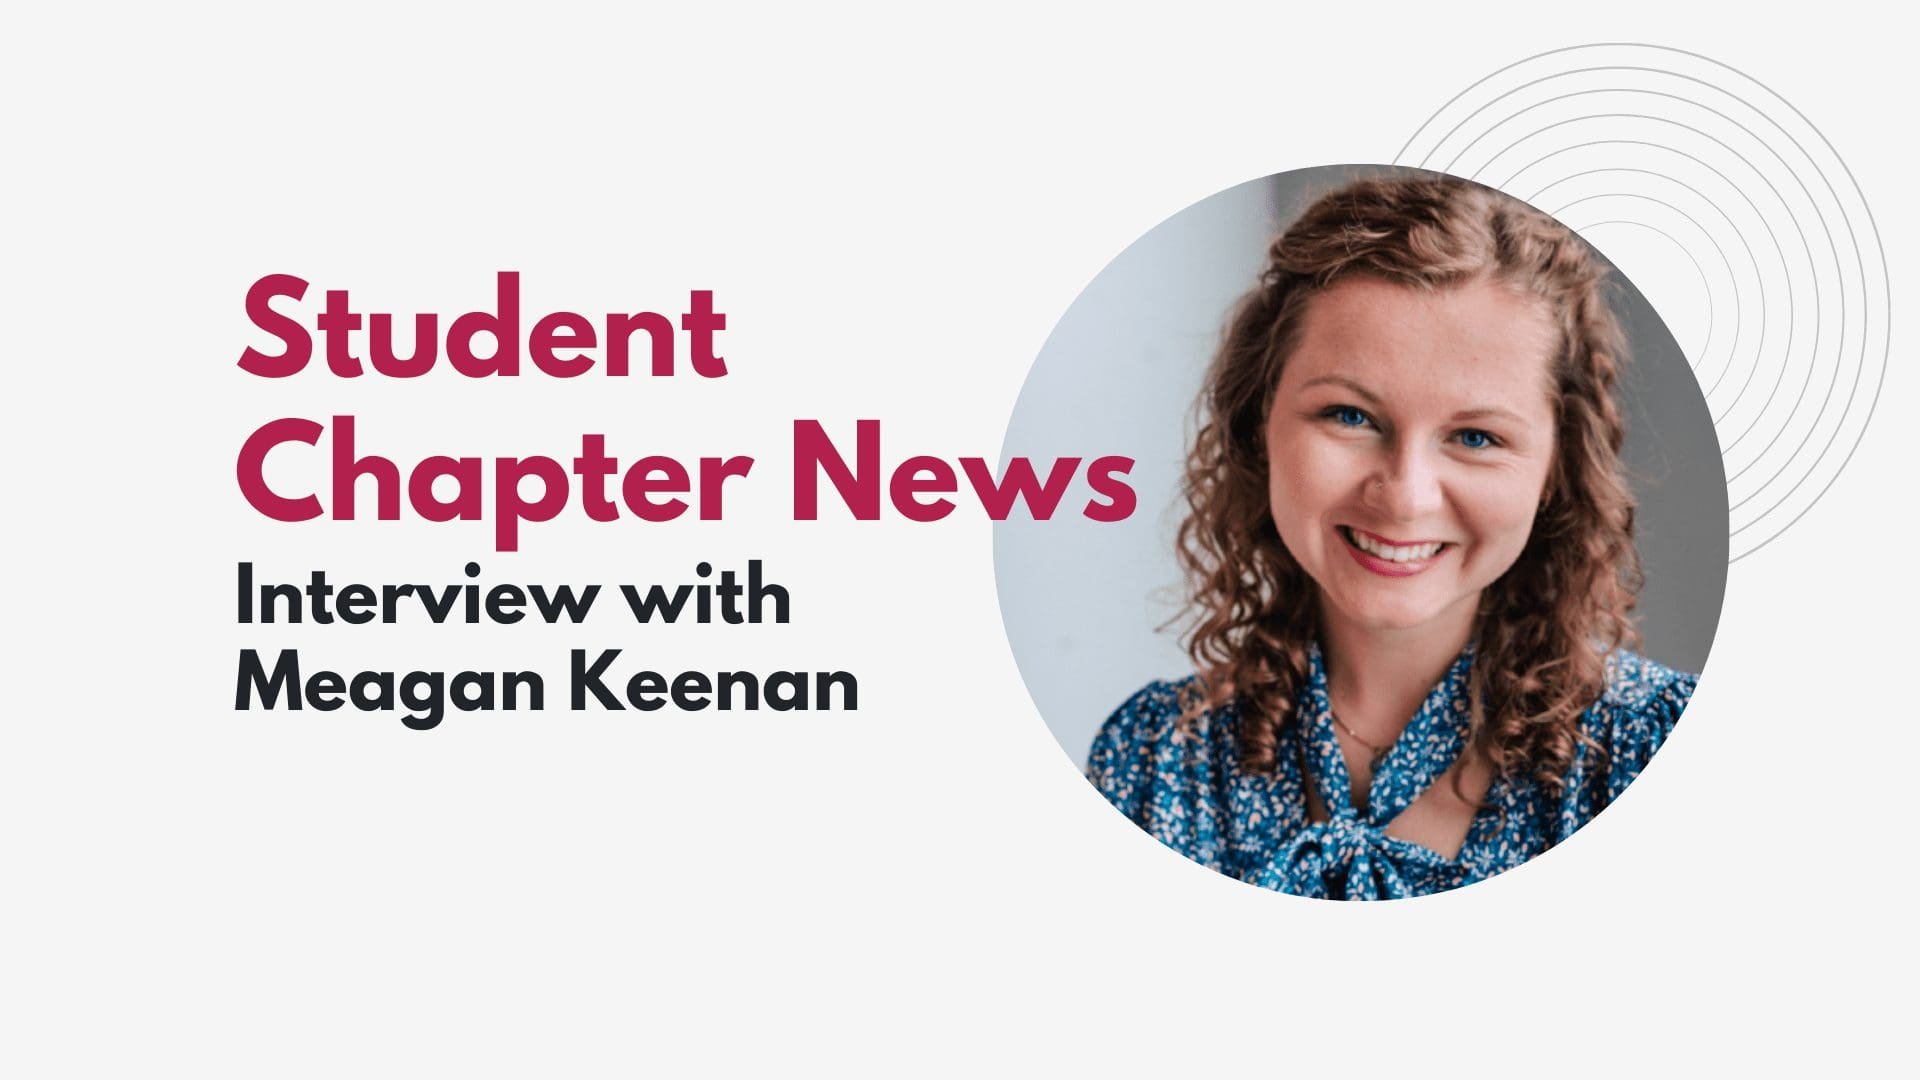 Student Chapter News: Interview with Meagan Keenan